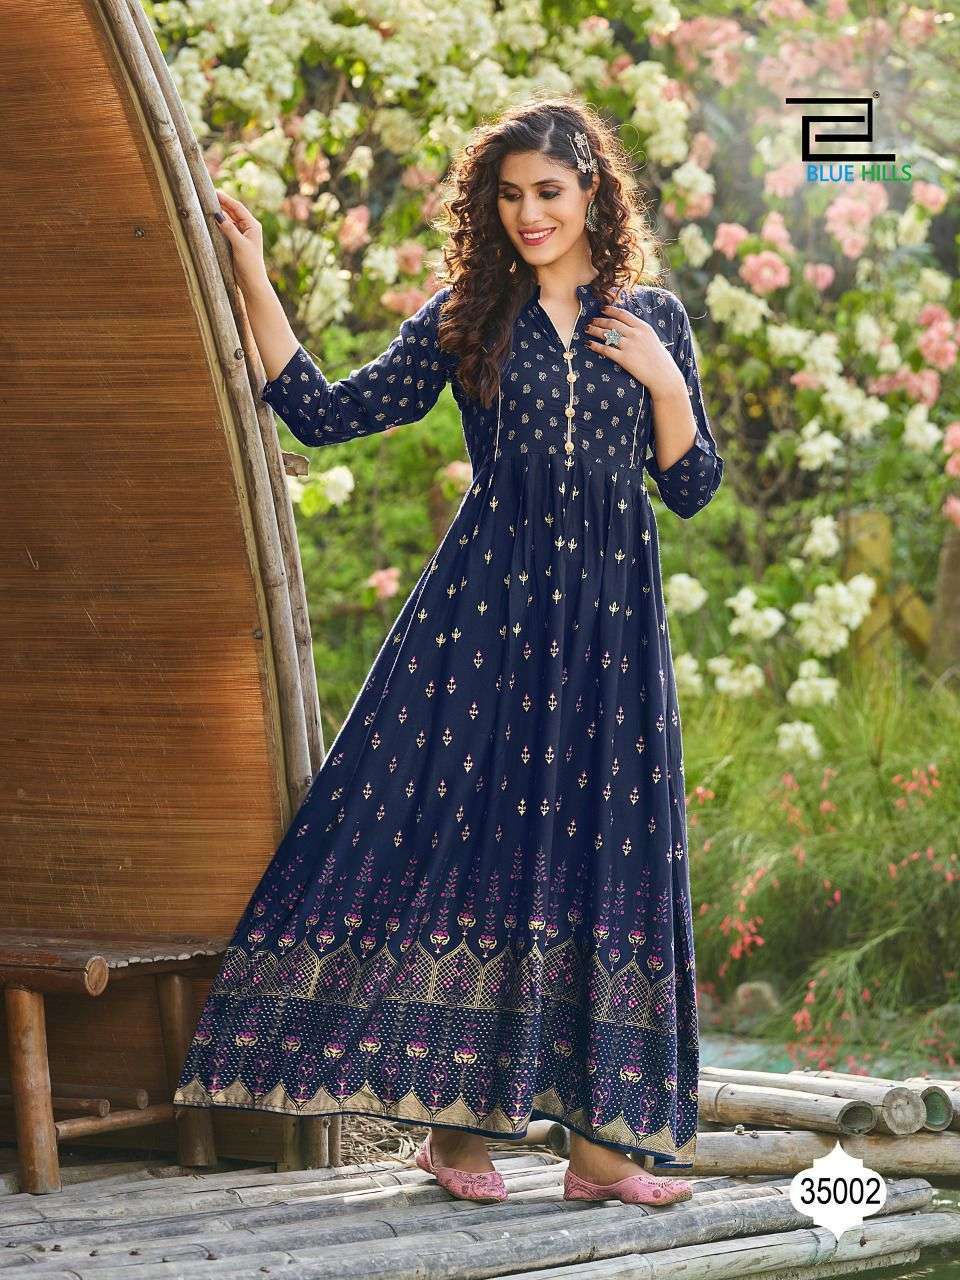 BLUE HILLS PRESENTS WALKWAY 35 HEAVY RAYON WITH FOIL PRINT WHOLESALE GOWN